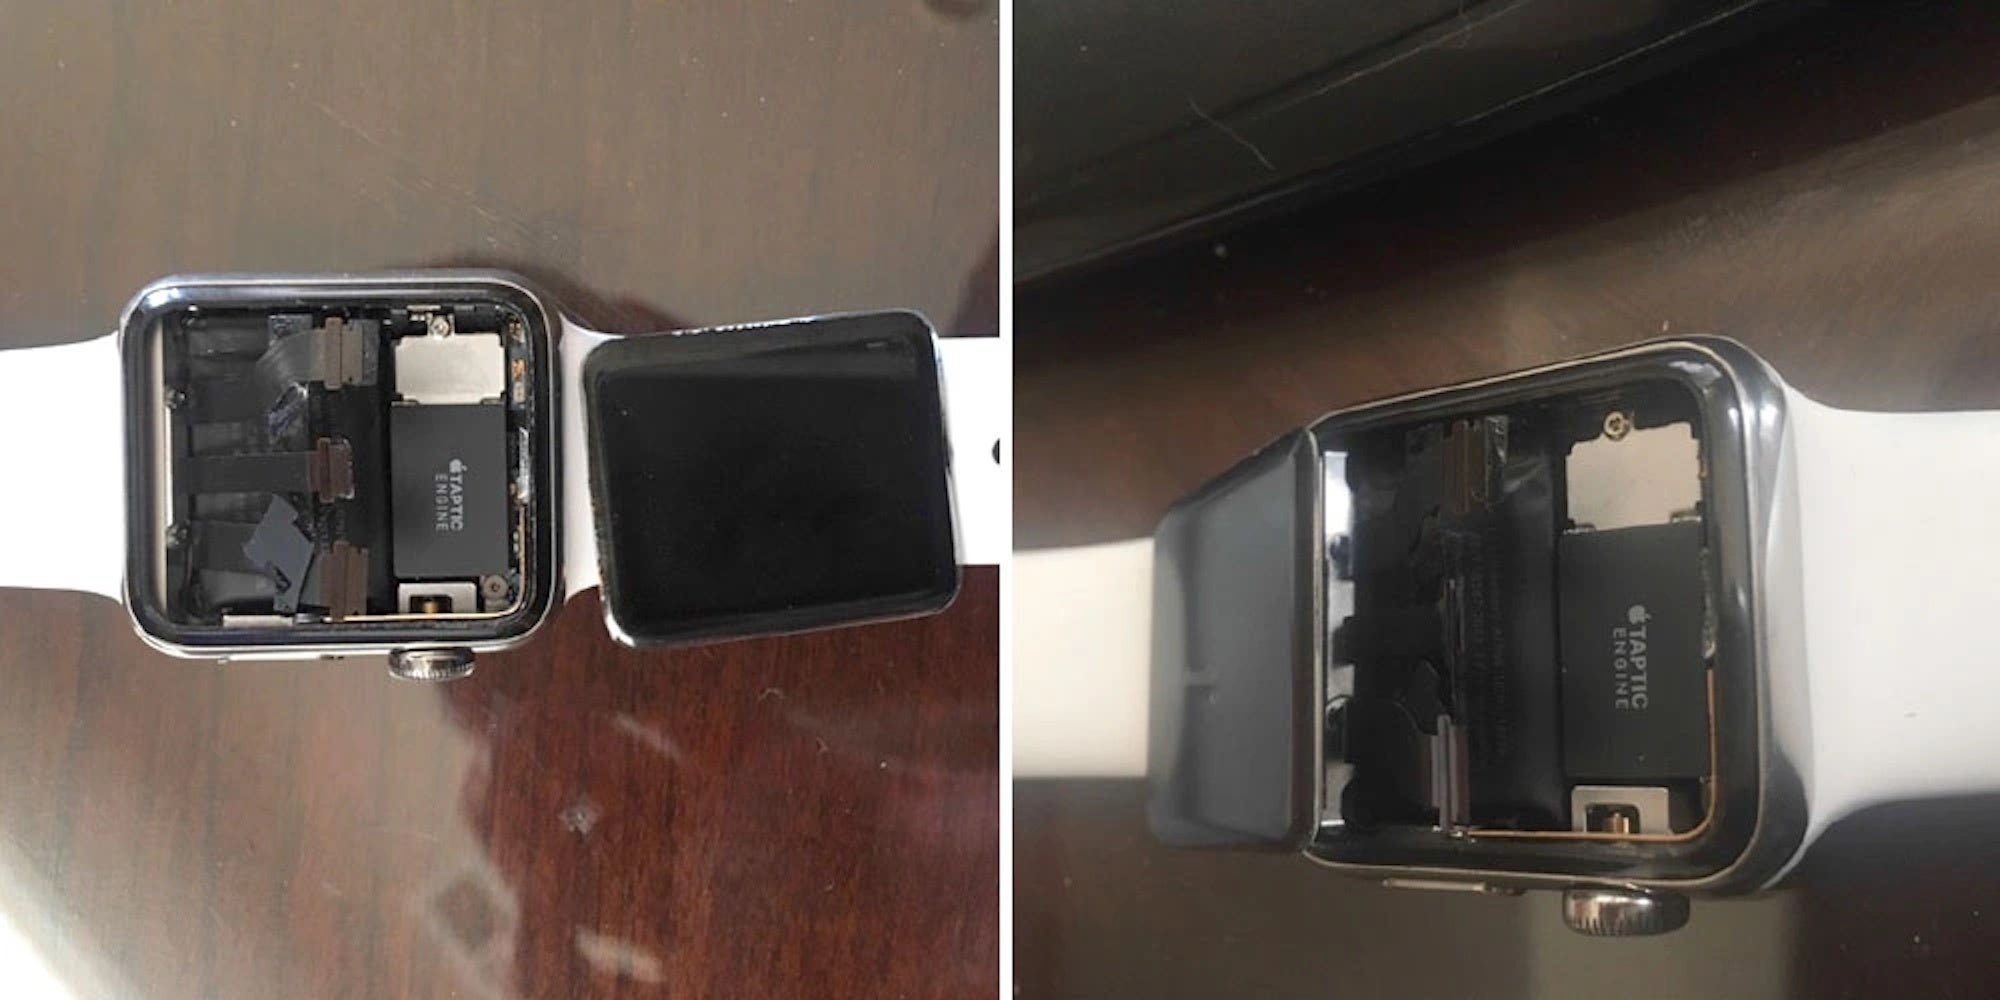 Apple faces class-action lawsuit over “dangerously breaking” Apple Watch devices